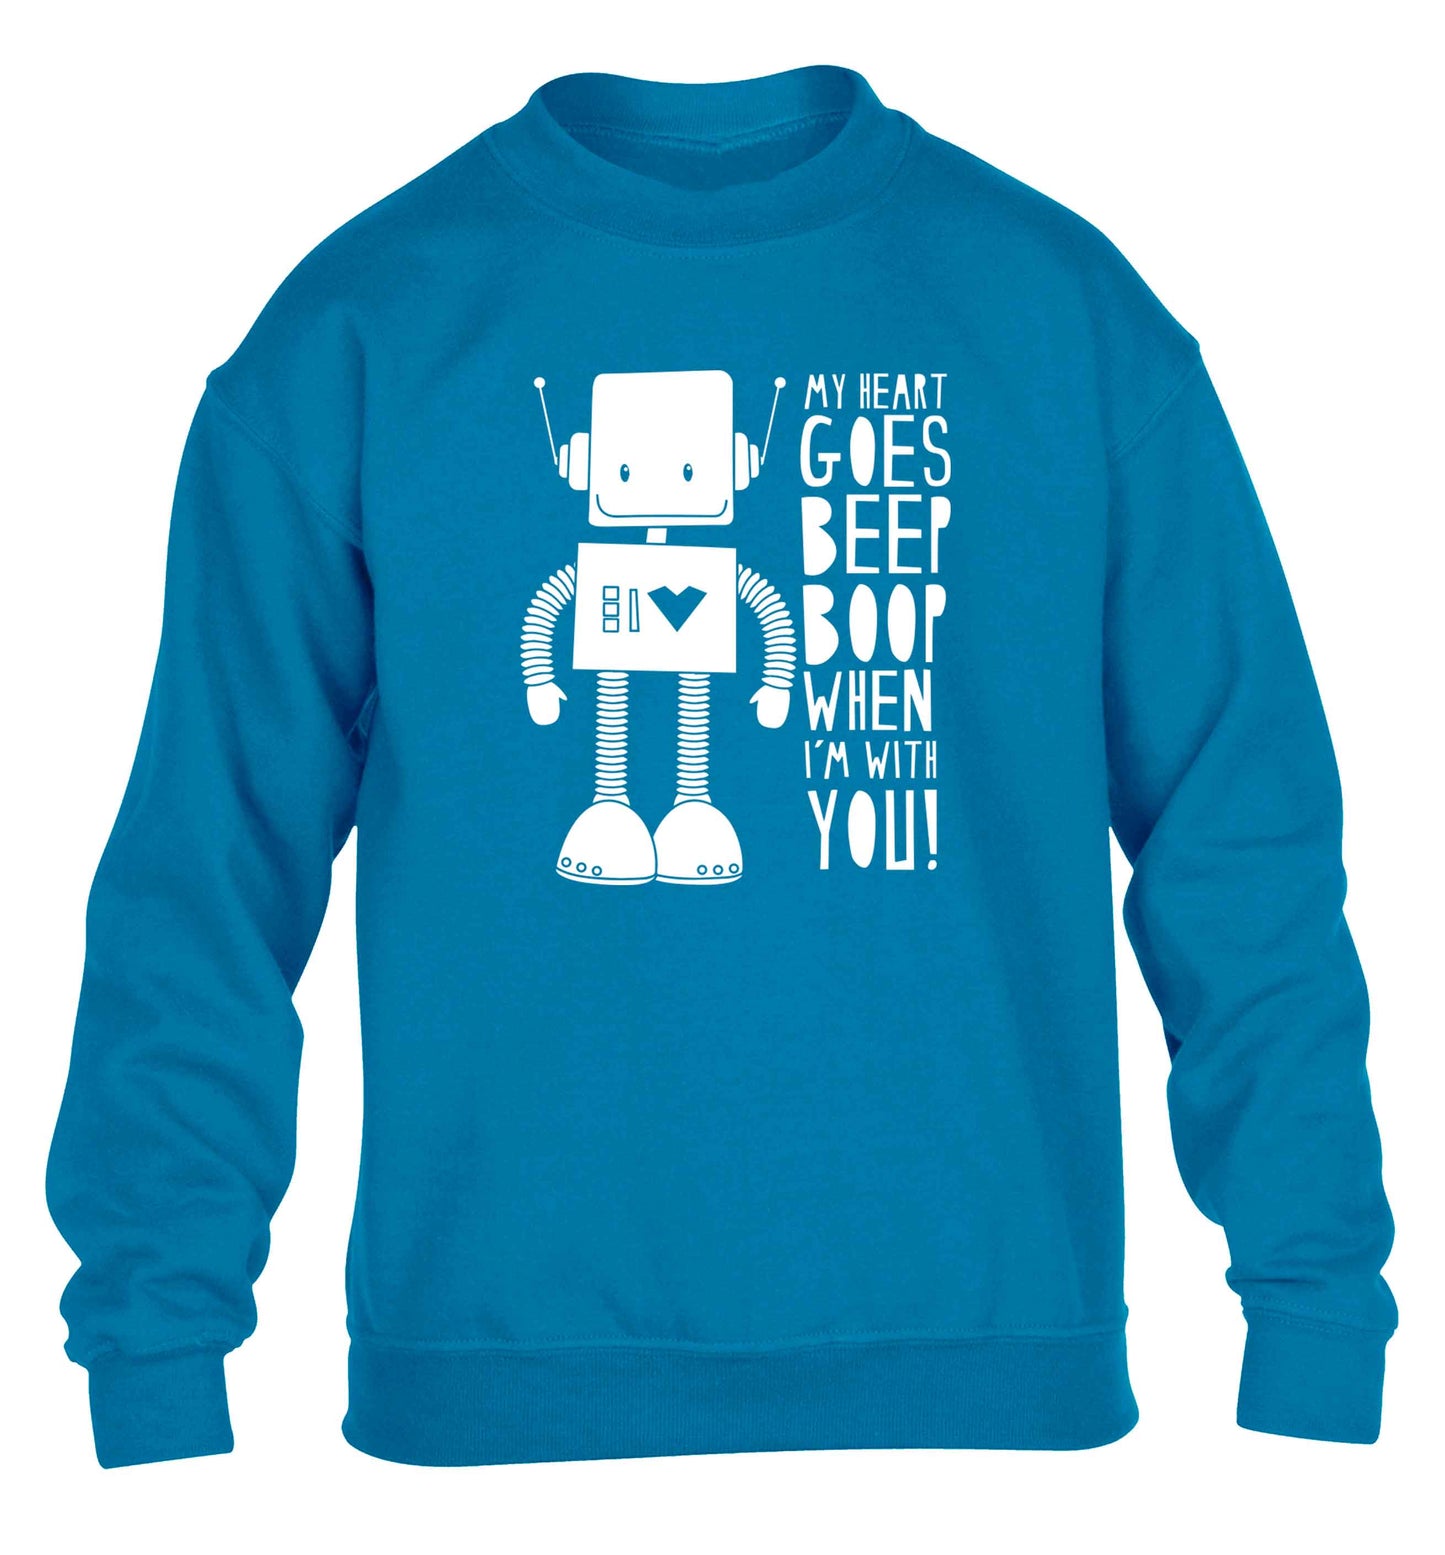 My heart goes beep boop when I'm with you children's blue sweater 12-13 Years